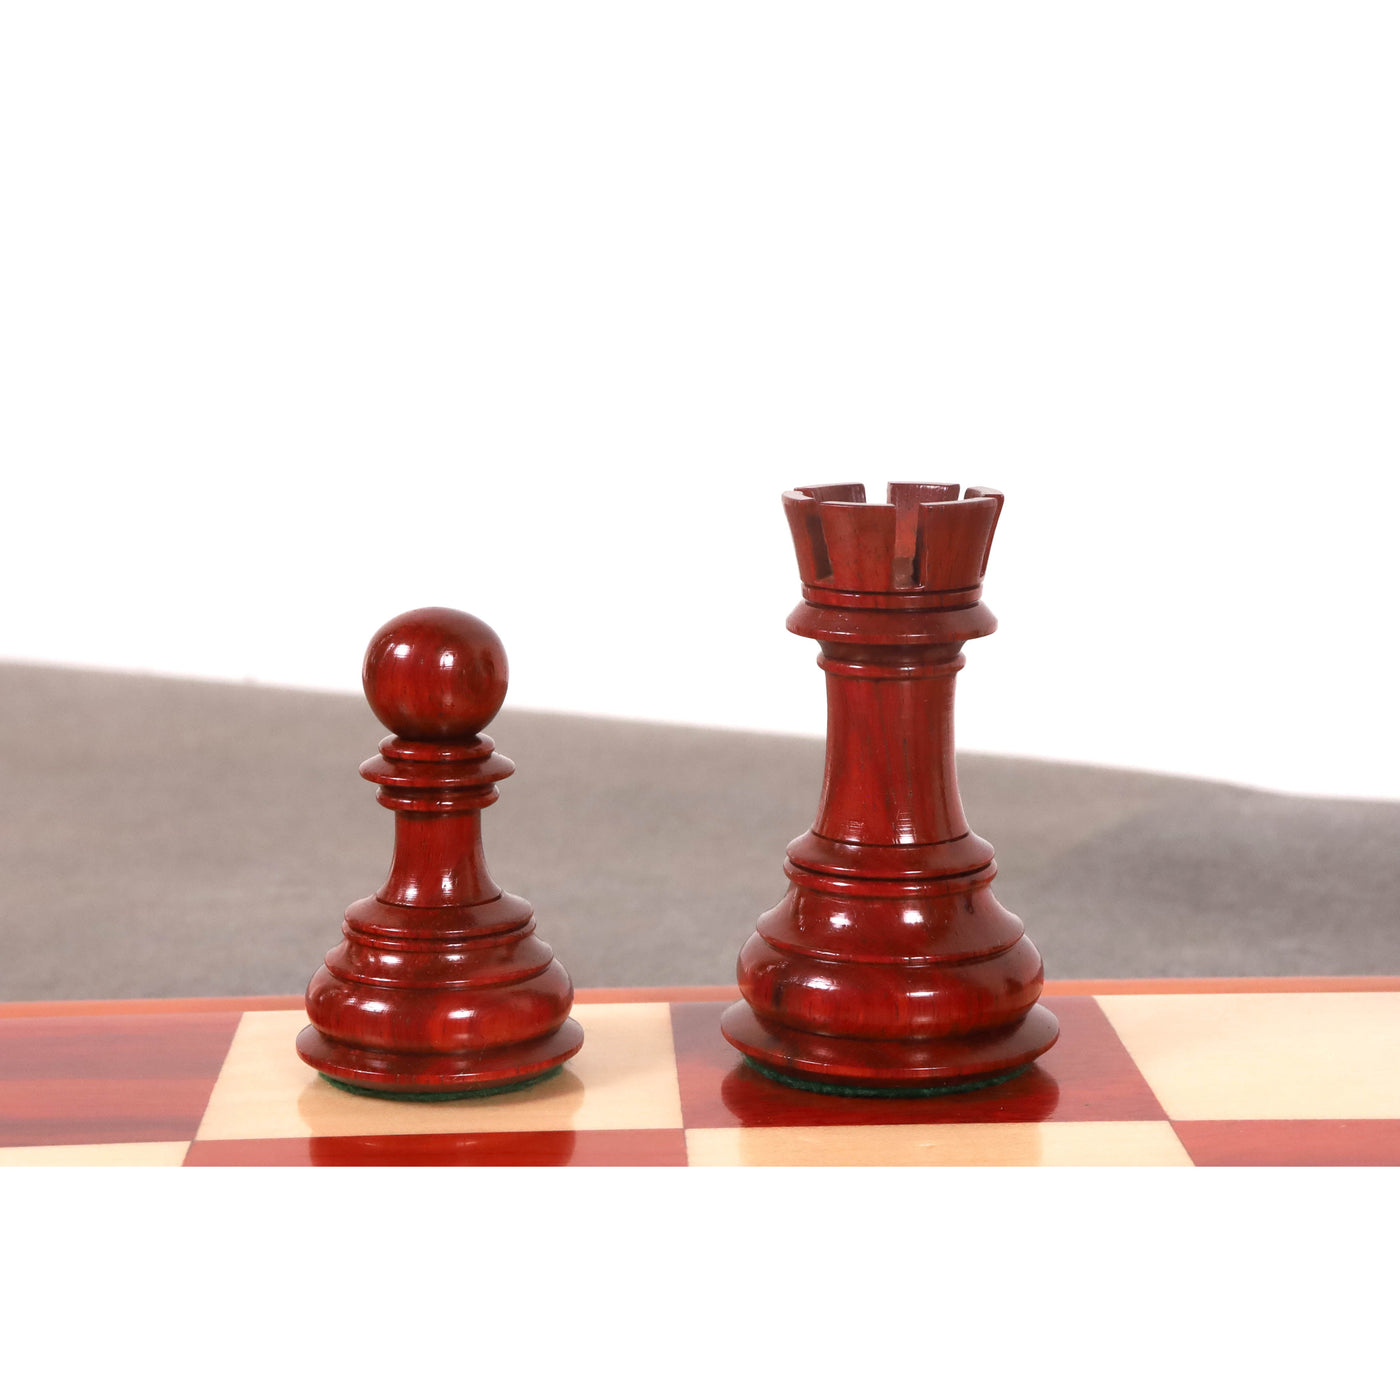 Combo of 4.6" Rare Columbian Luxury Chess Set - Pieces in Bud Rosewood with Board and Box